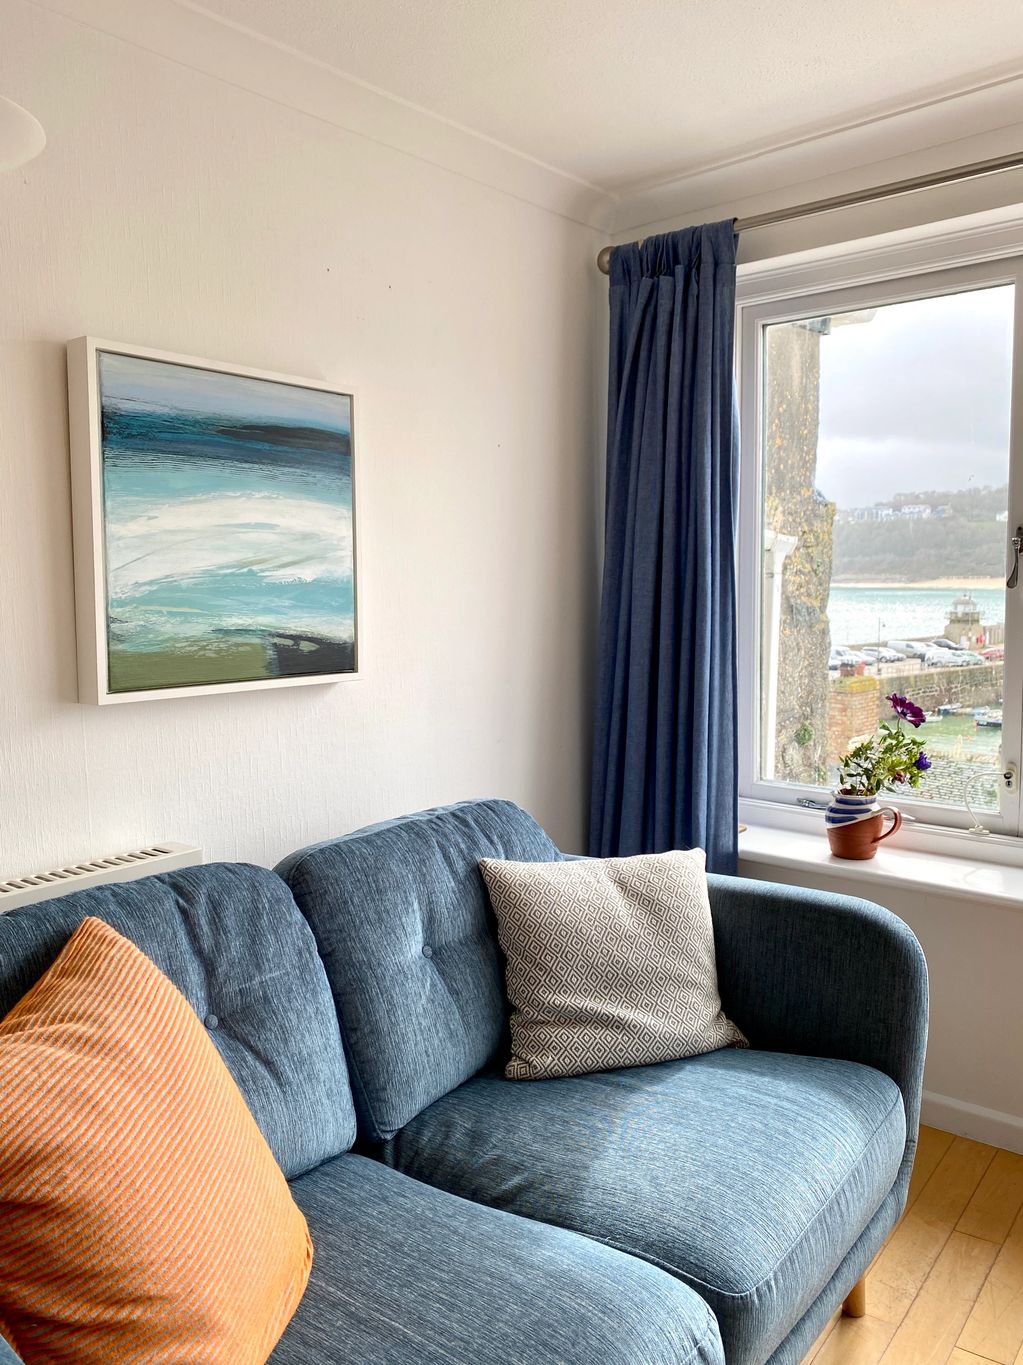 Atmospheric painting inspired by the sea, in a home looking over the harbour